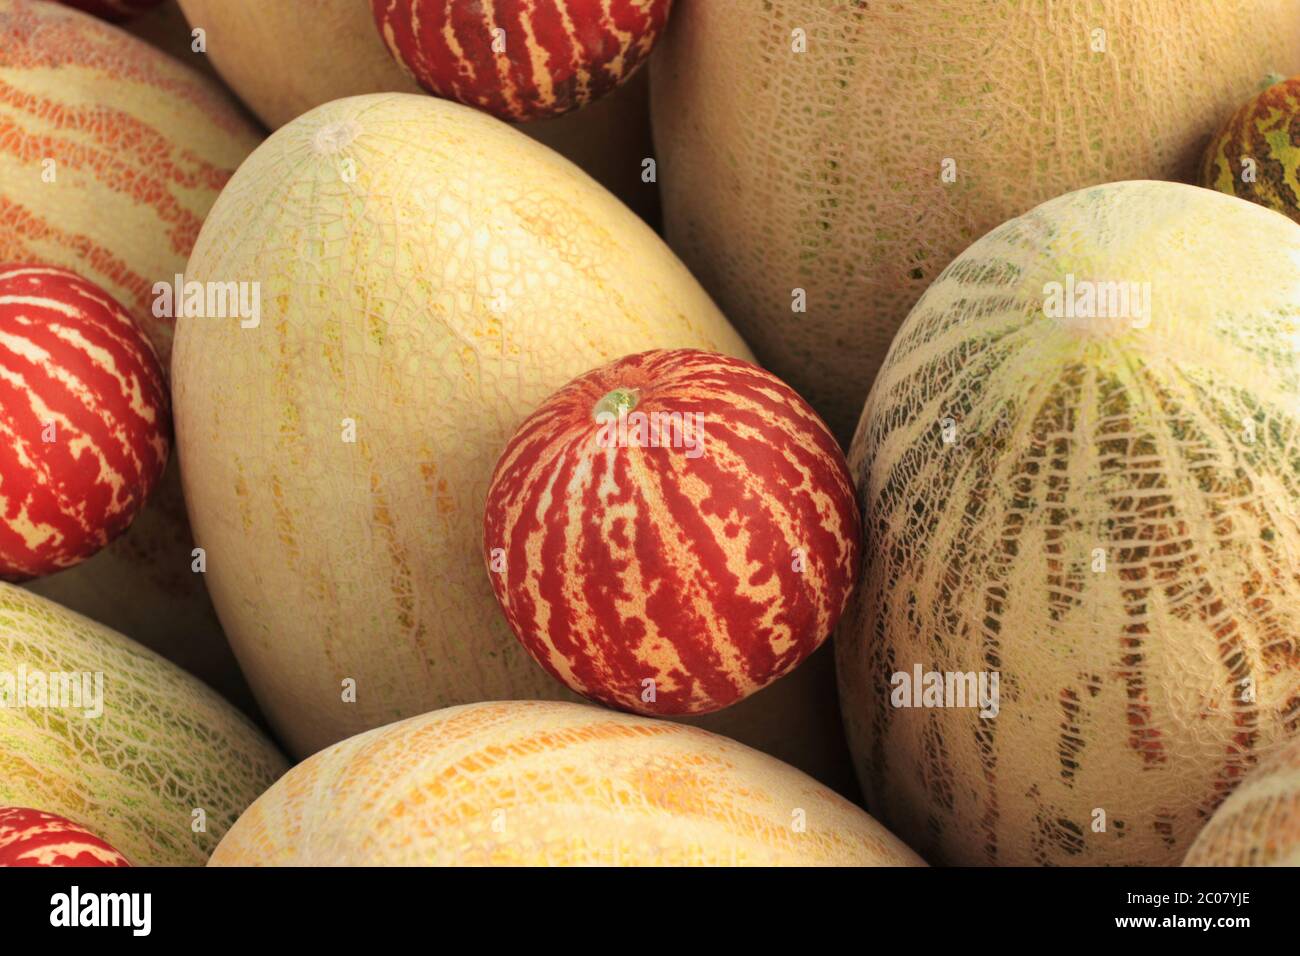 Some big yellow melons and small red melons Stock Photo